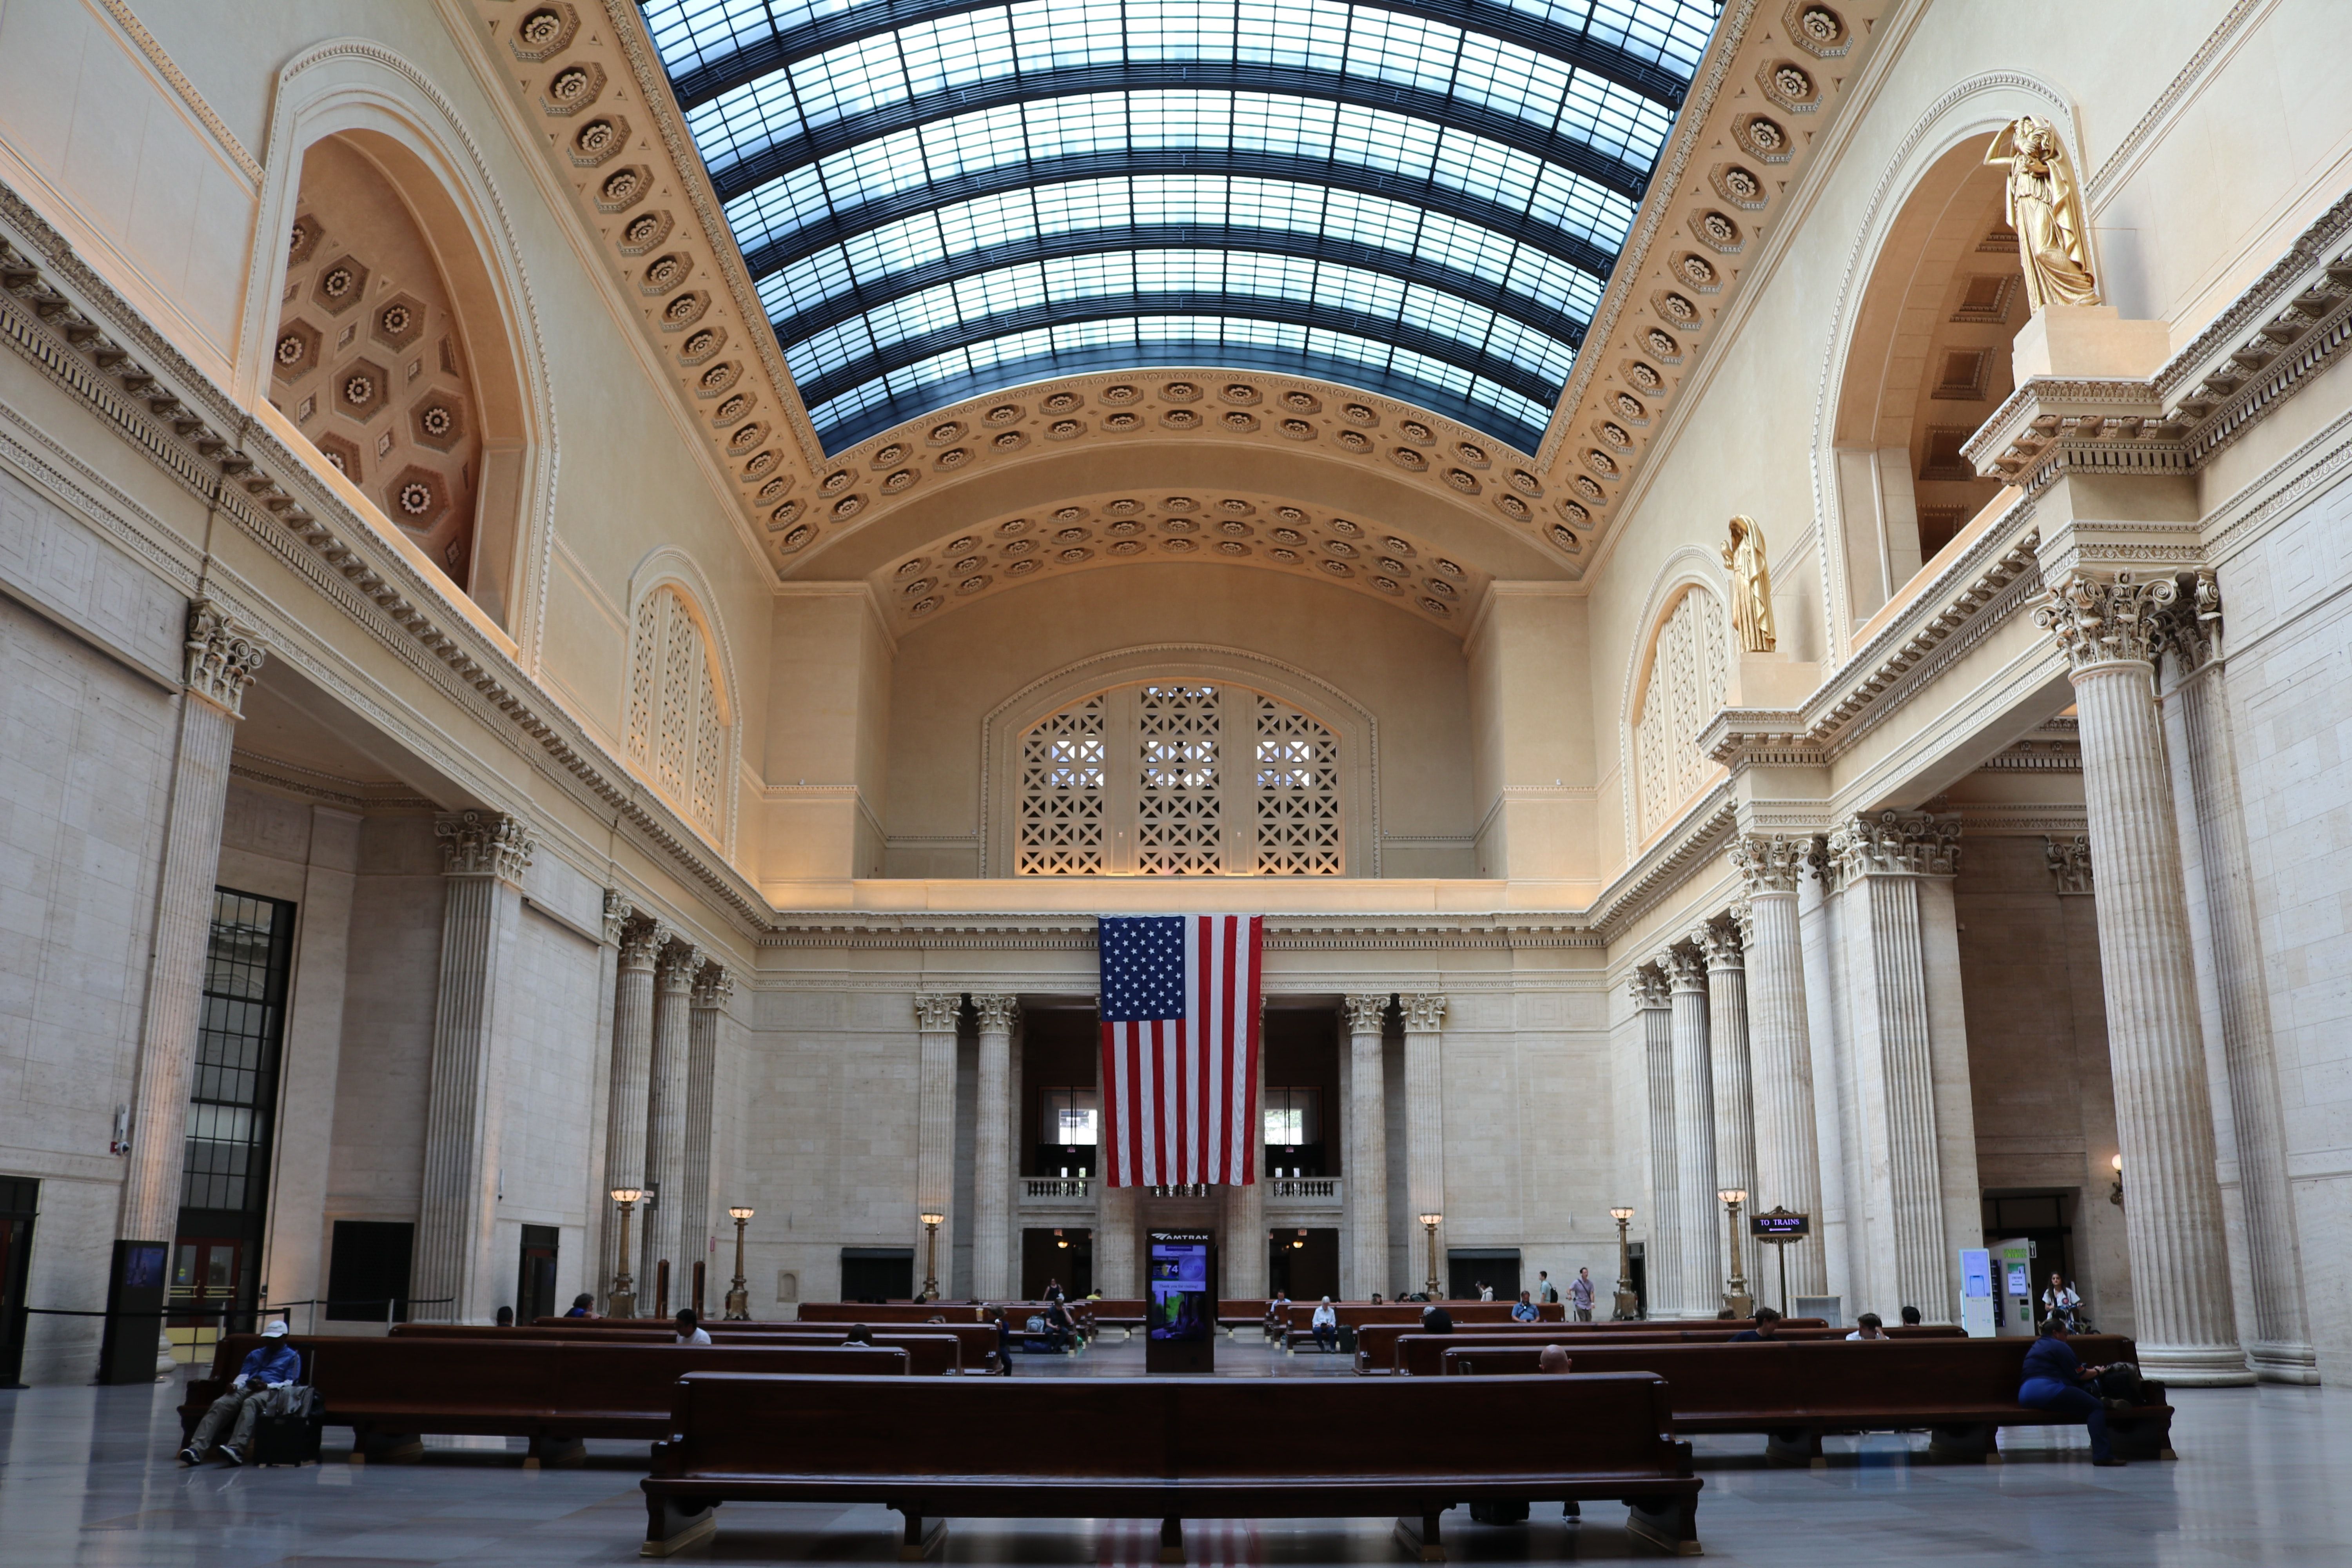 Union Station interior bright ceiling showing the sky American flag hangs in background.